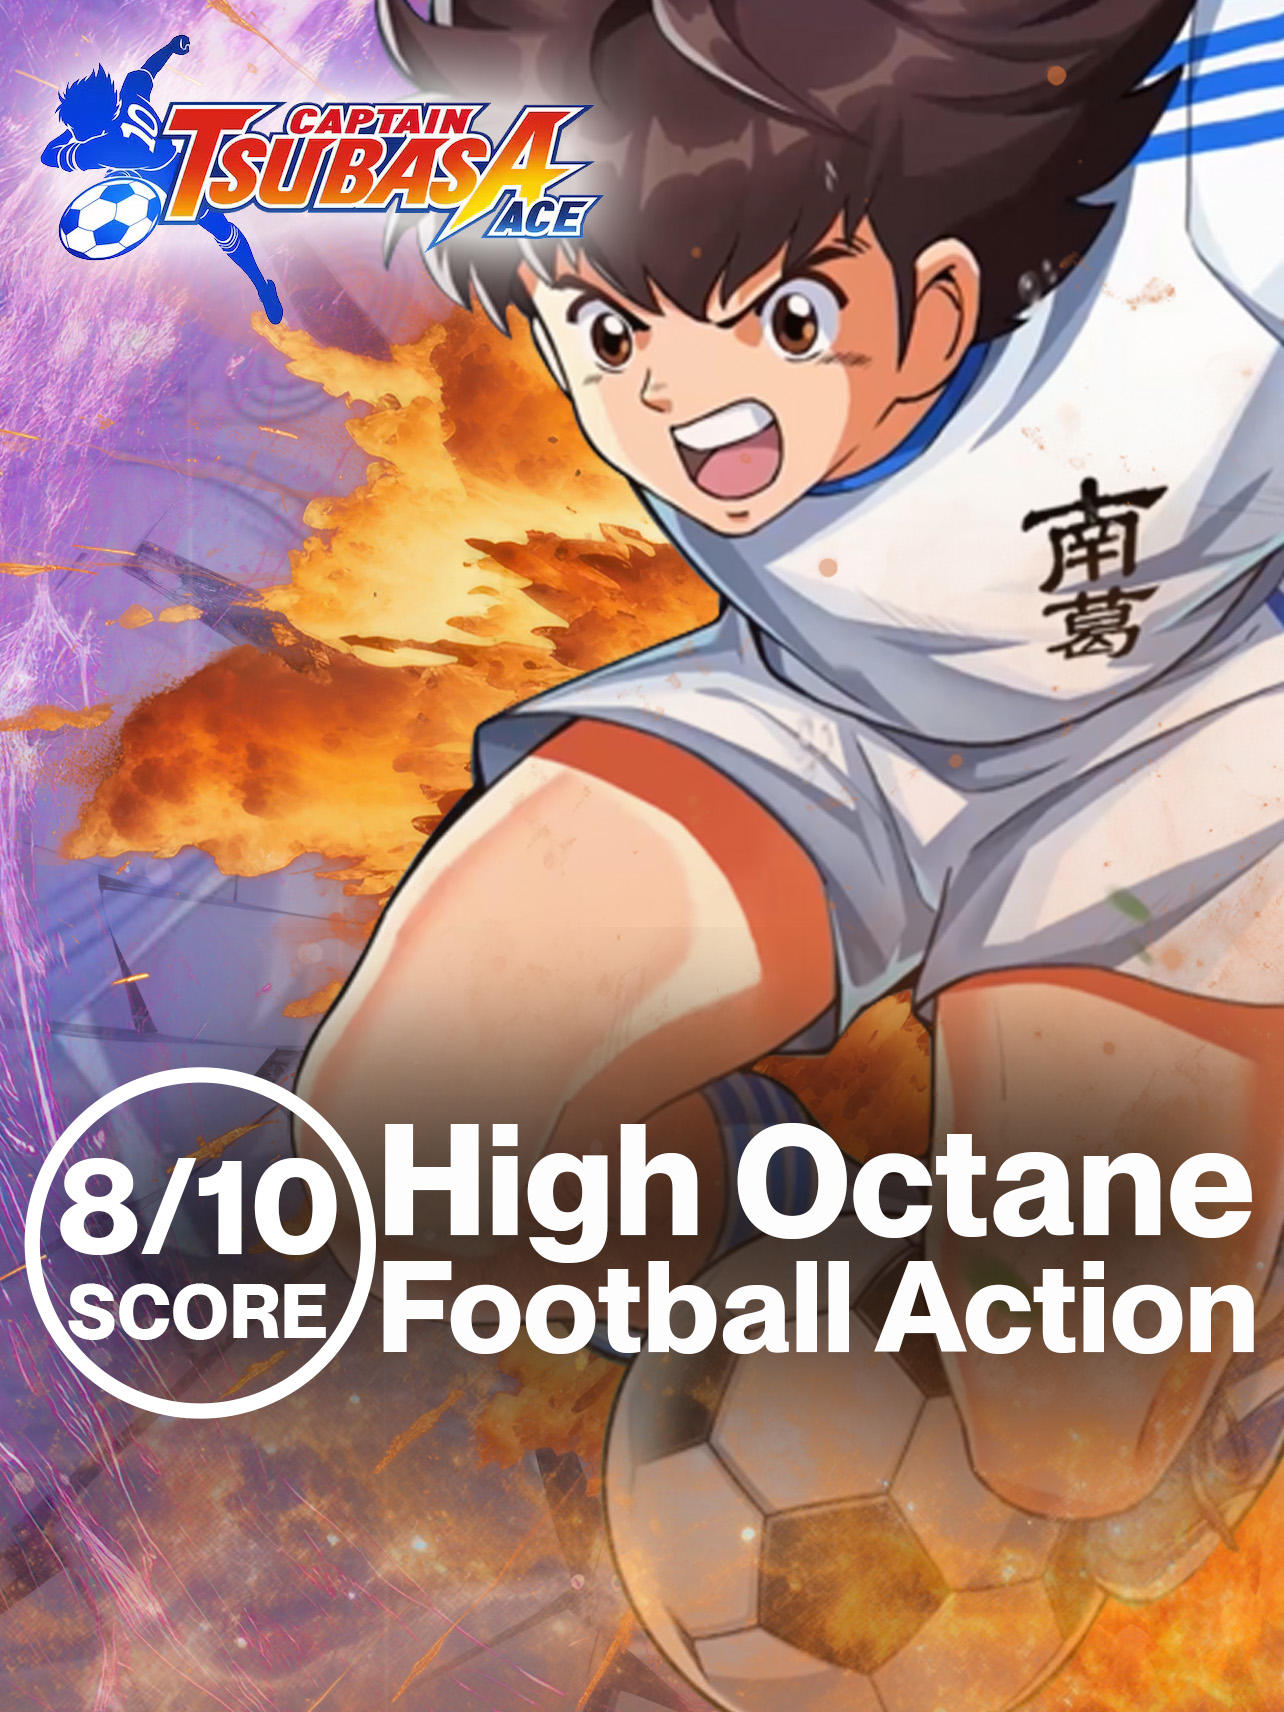 Captain Tsubasa Ace Competitive Football Game Announced for Mobile - QooApp  News